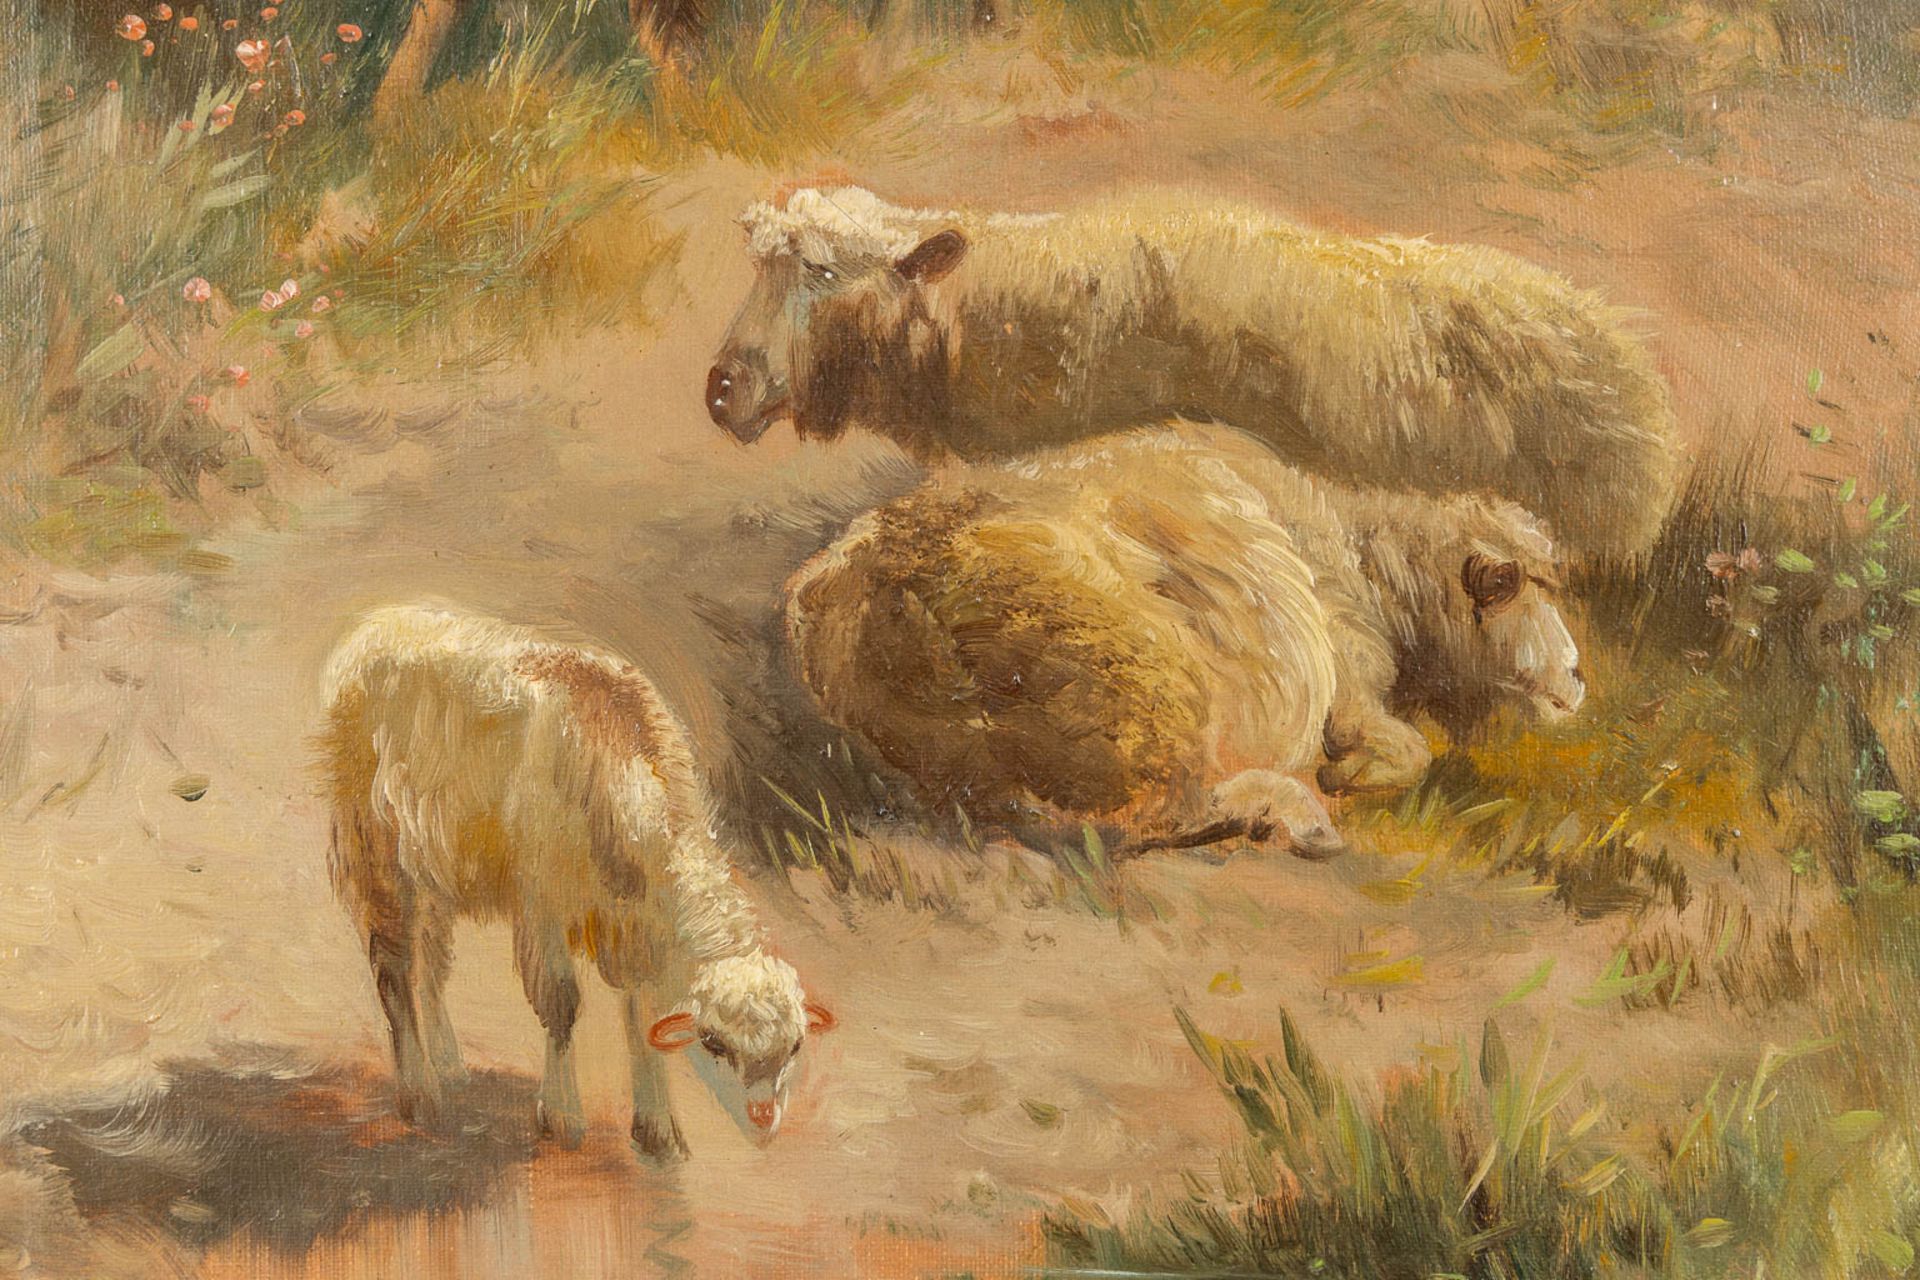 Henry SCHOUTEN (1857/64-1927) 'Sheep herder on the look' oil on canvas. (W:80 x H:60 cm) - Image 6 of 9